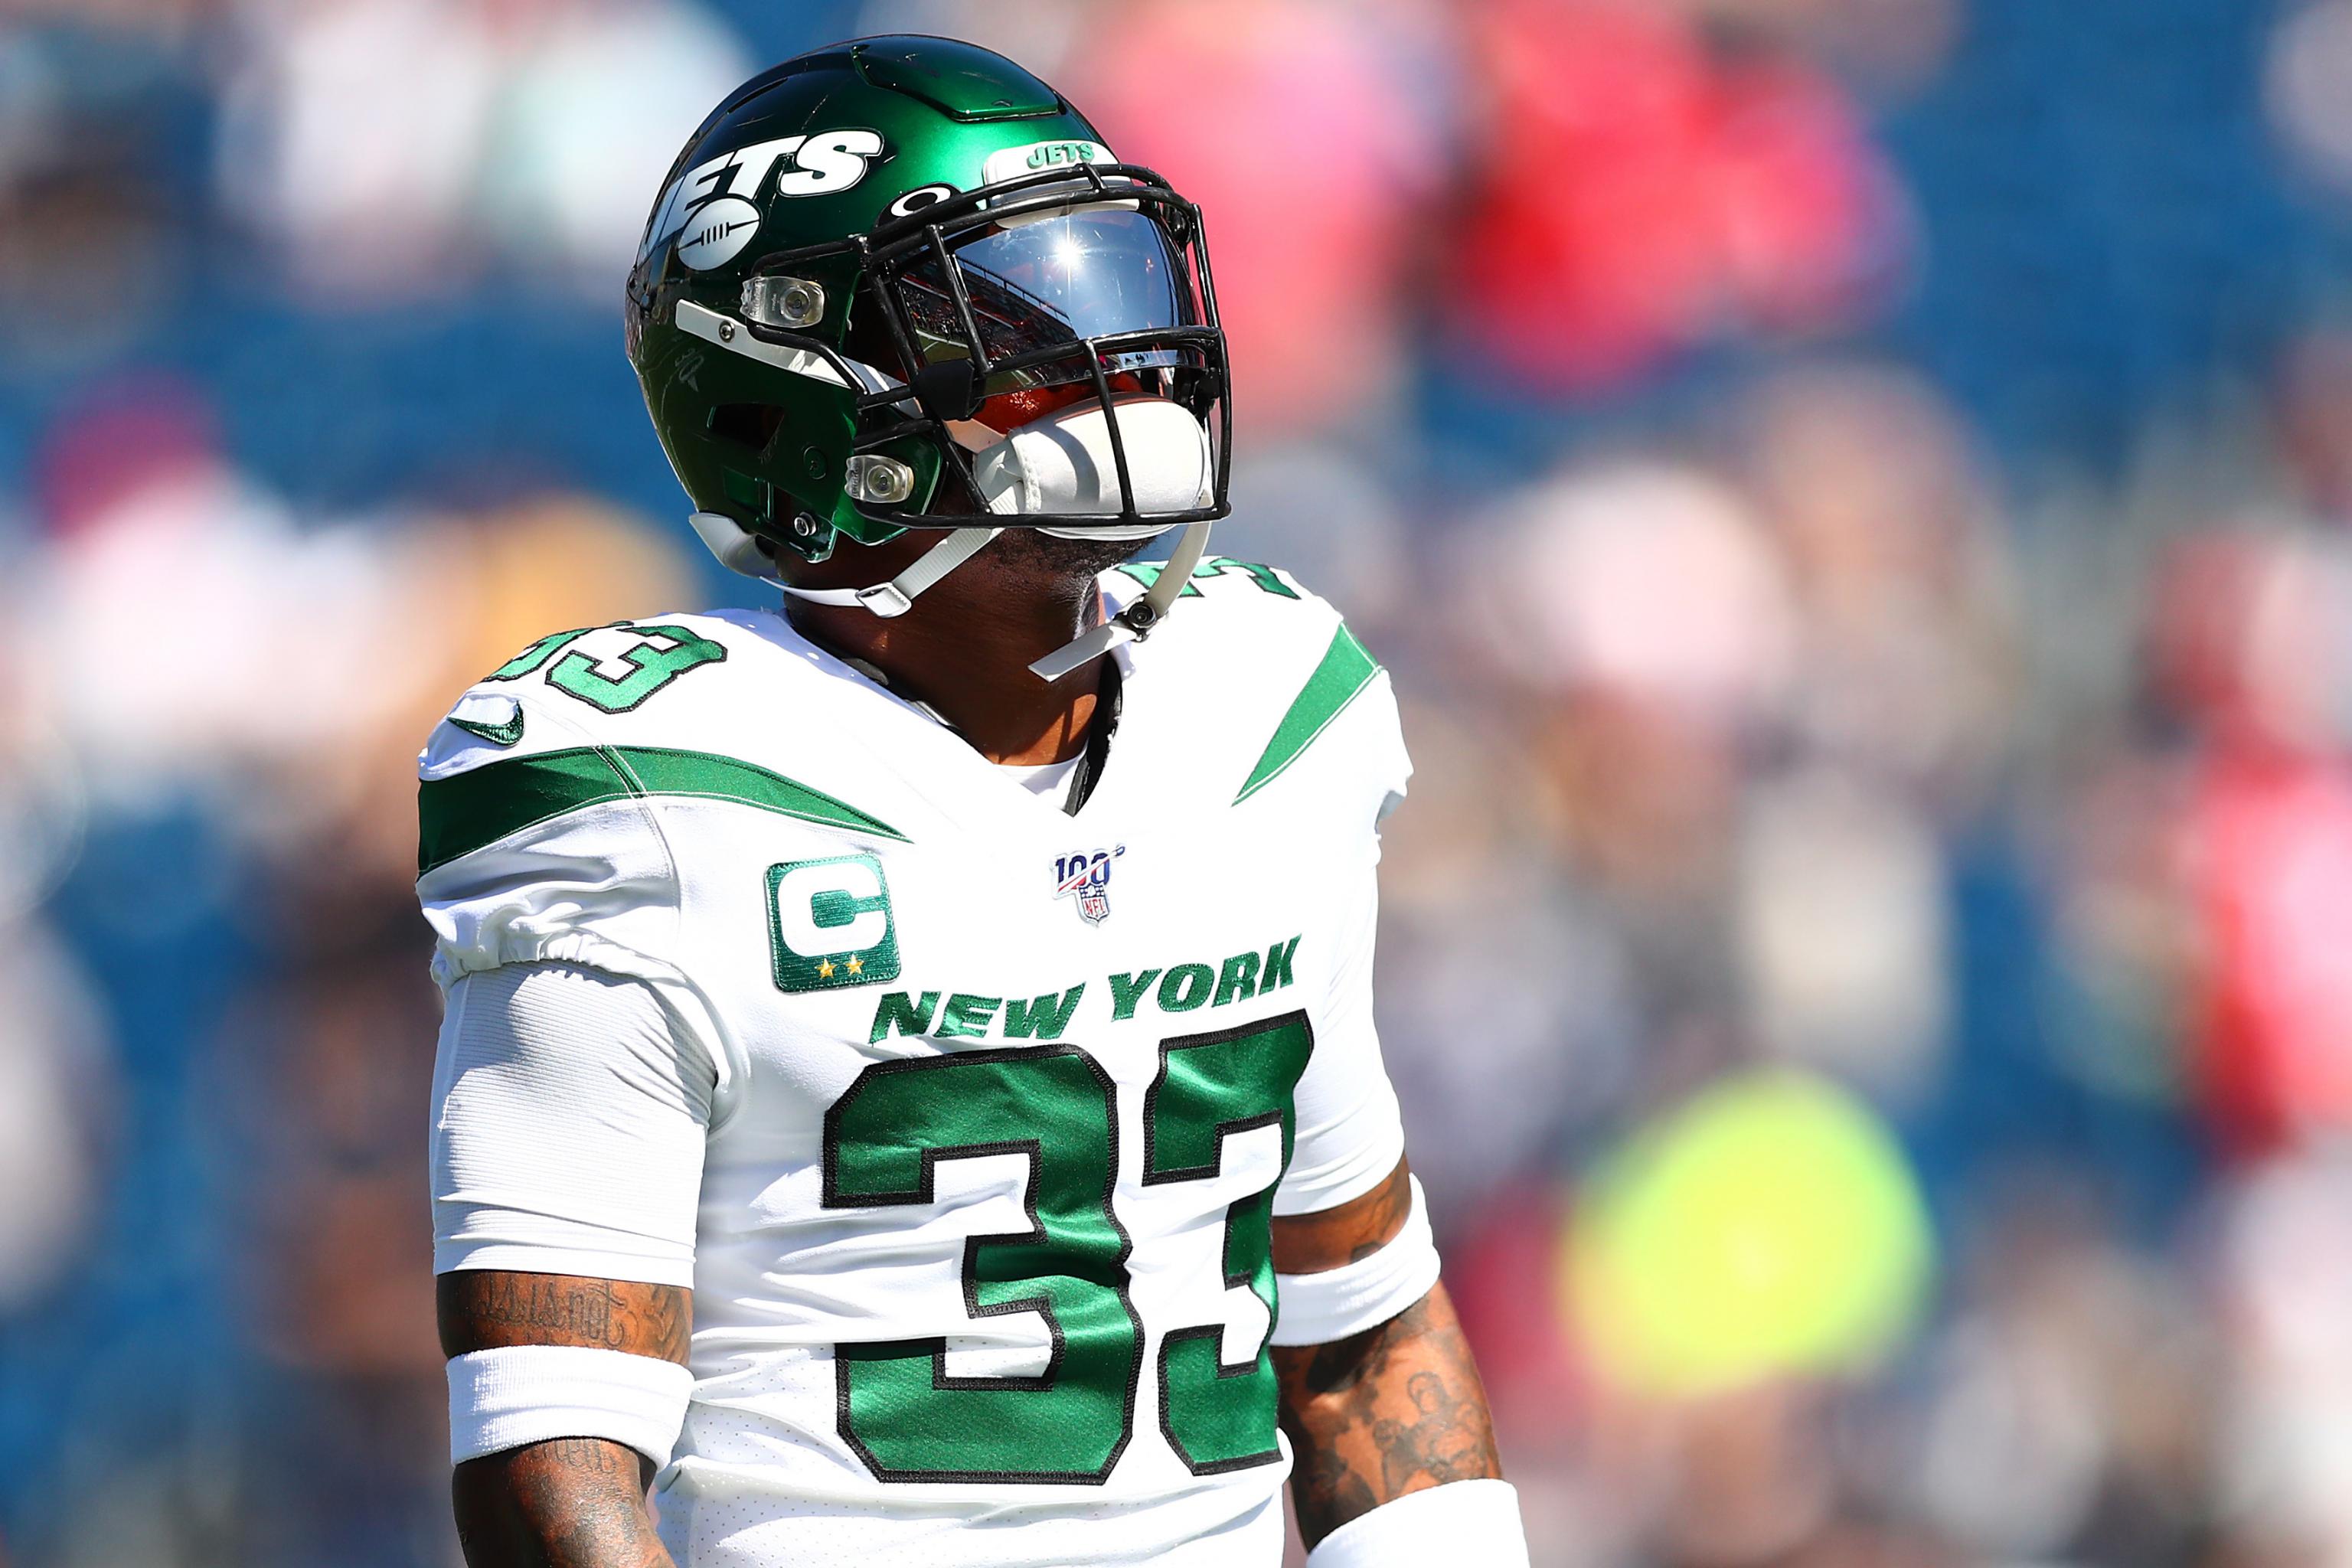 New York Jets steamrolled by Jamal Adams and the Seattle Seahawks